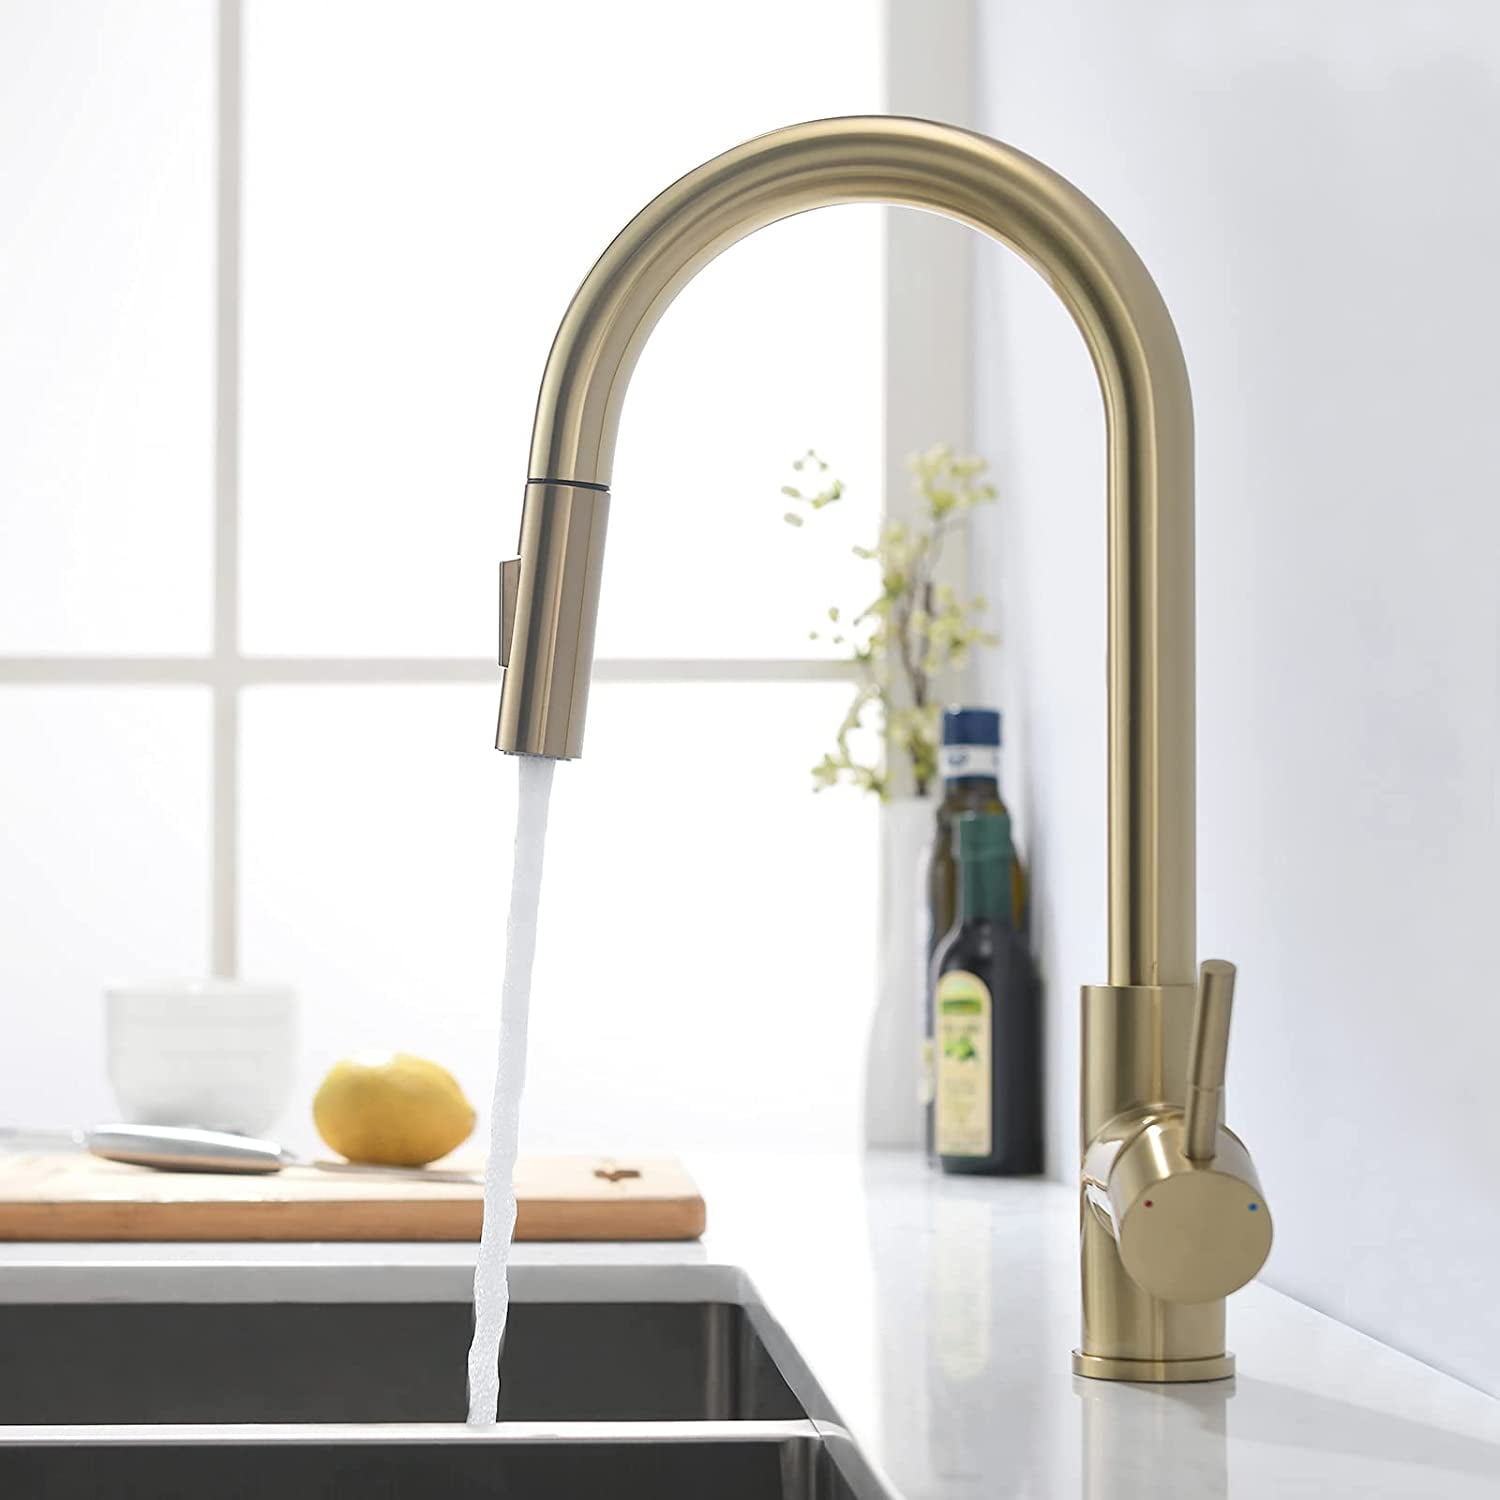 Kitchen Faucet SingleHandle Swivel Spout Pull Out Sprayer Mixer Tap Brushed Gold